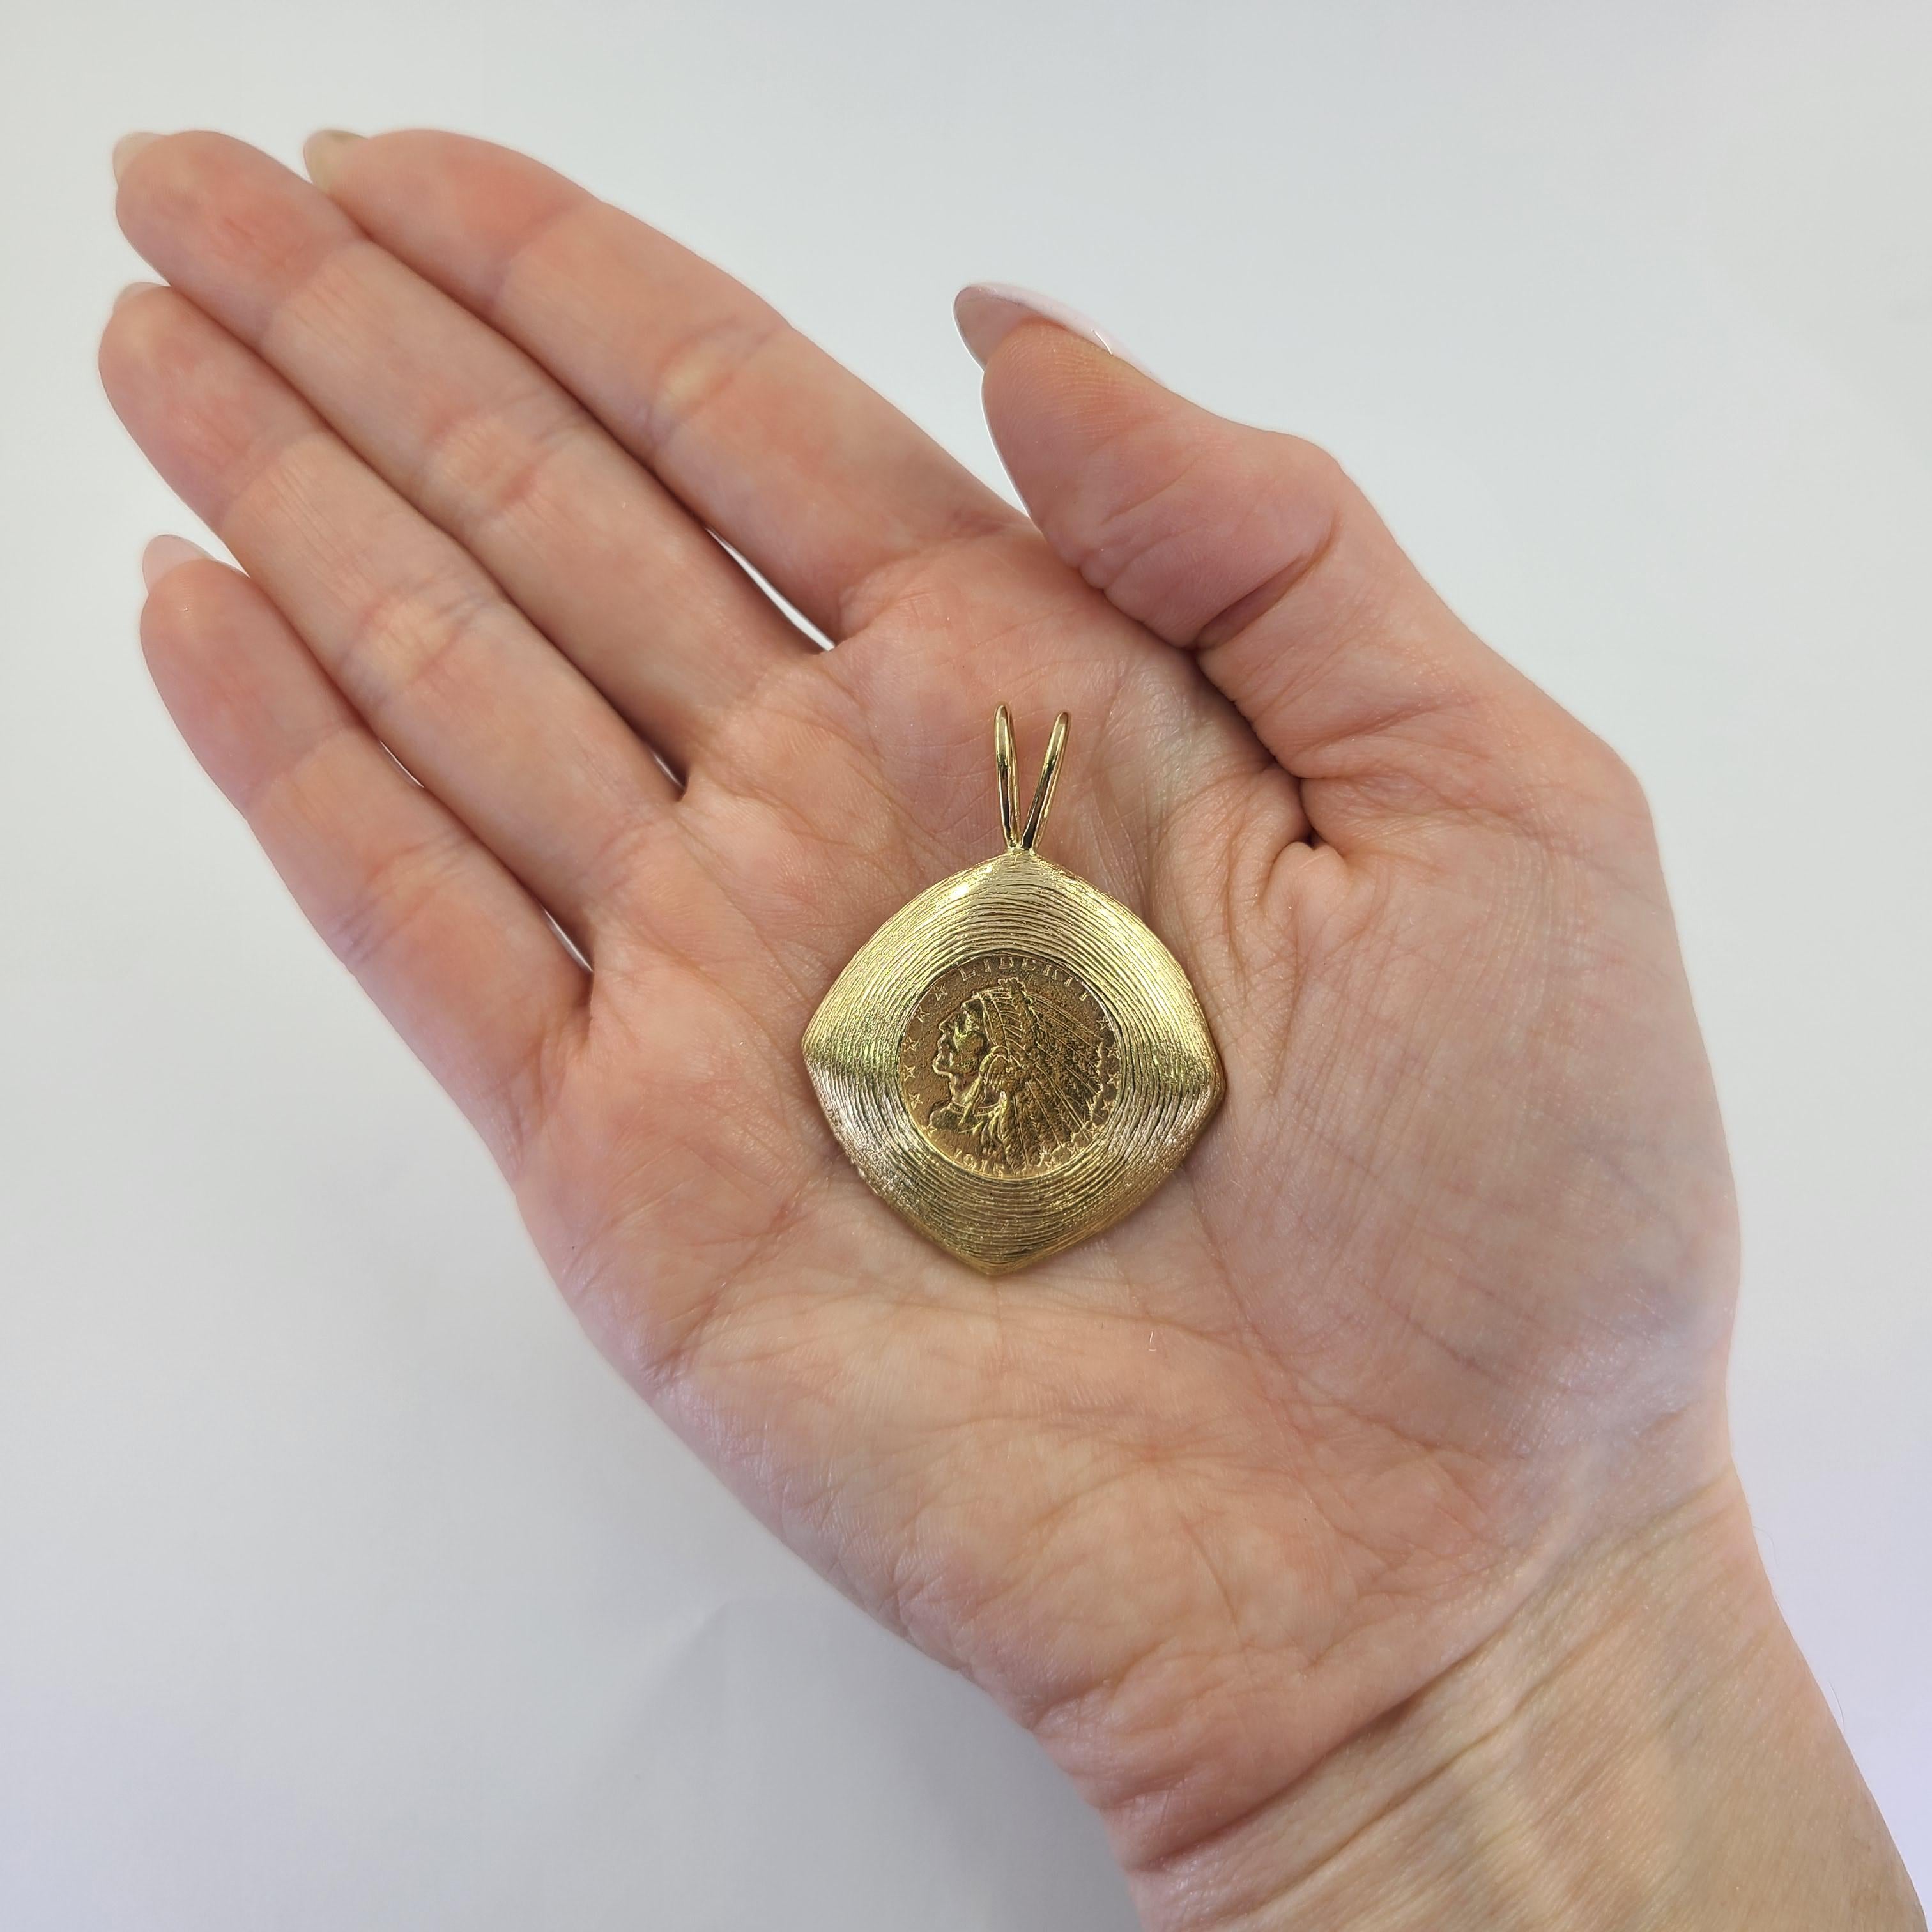 14 Karat Yellow Gold Textured Pendant Featuring A 22 Karat Yellow Gold $2.50 Indian Head Coin From 1915. 1.75 Inches Long Including Bale. Finished Weight Is 13.0 Grams.